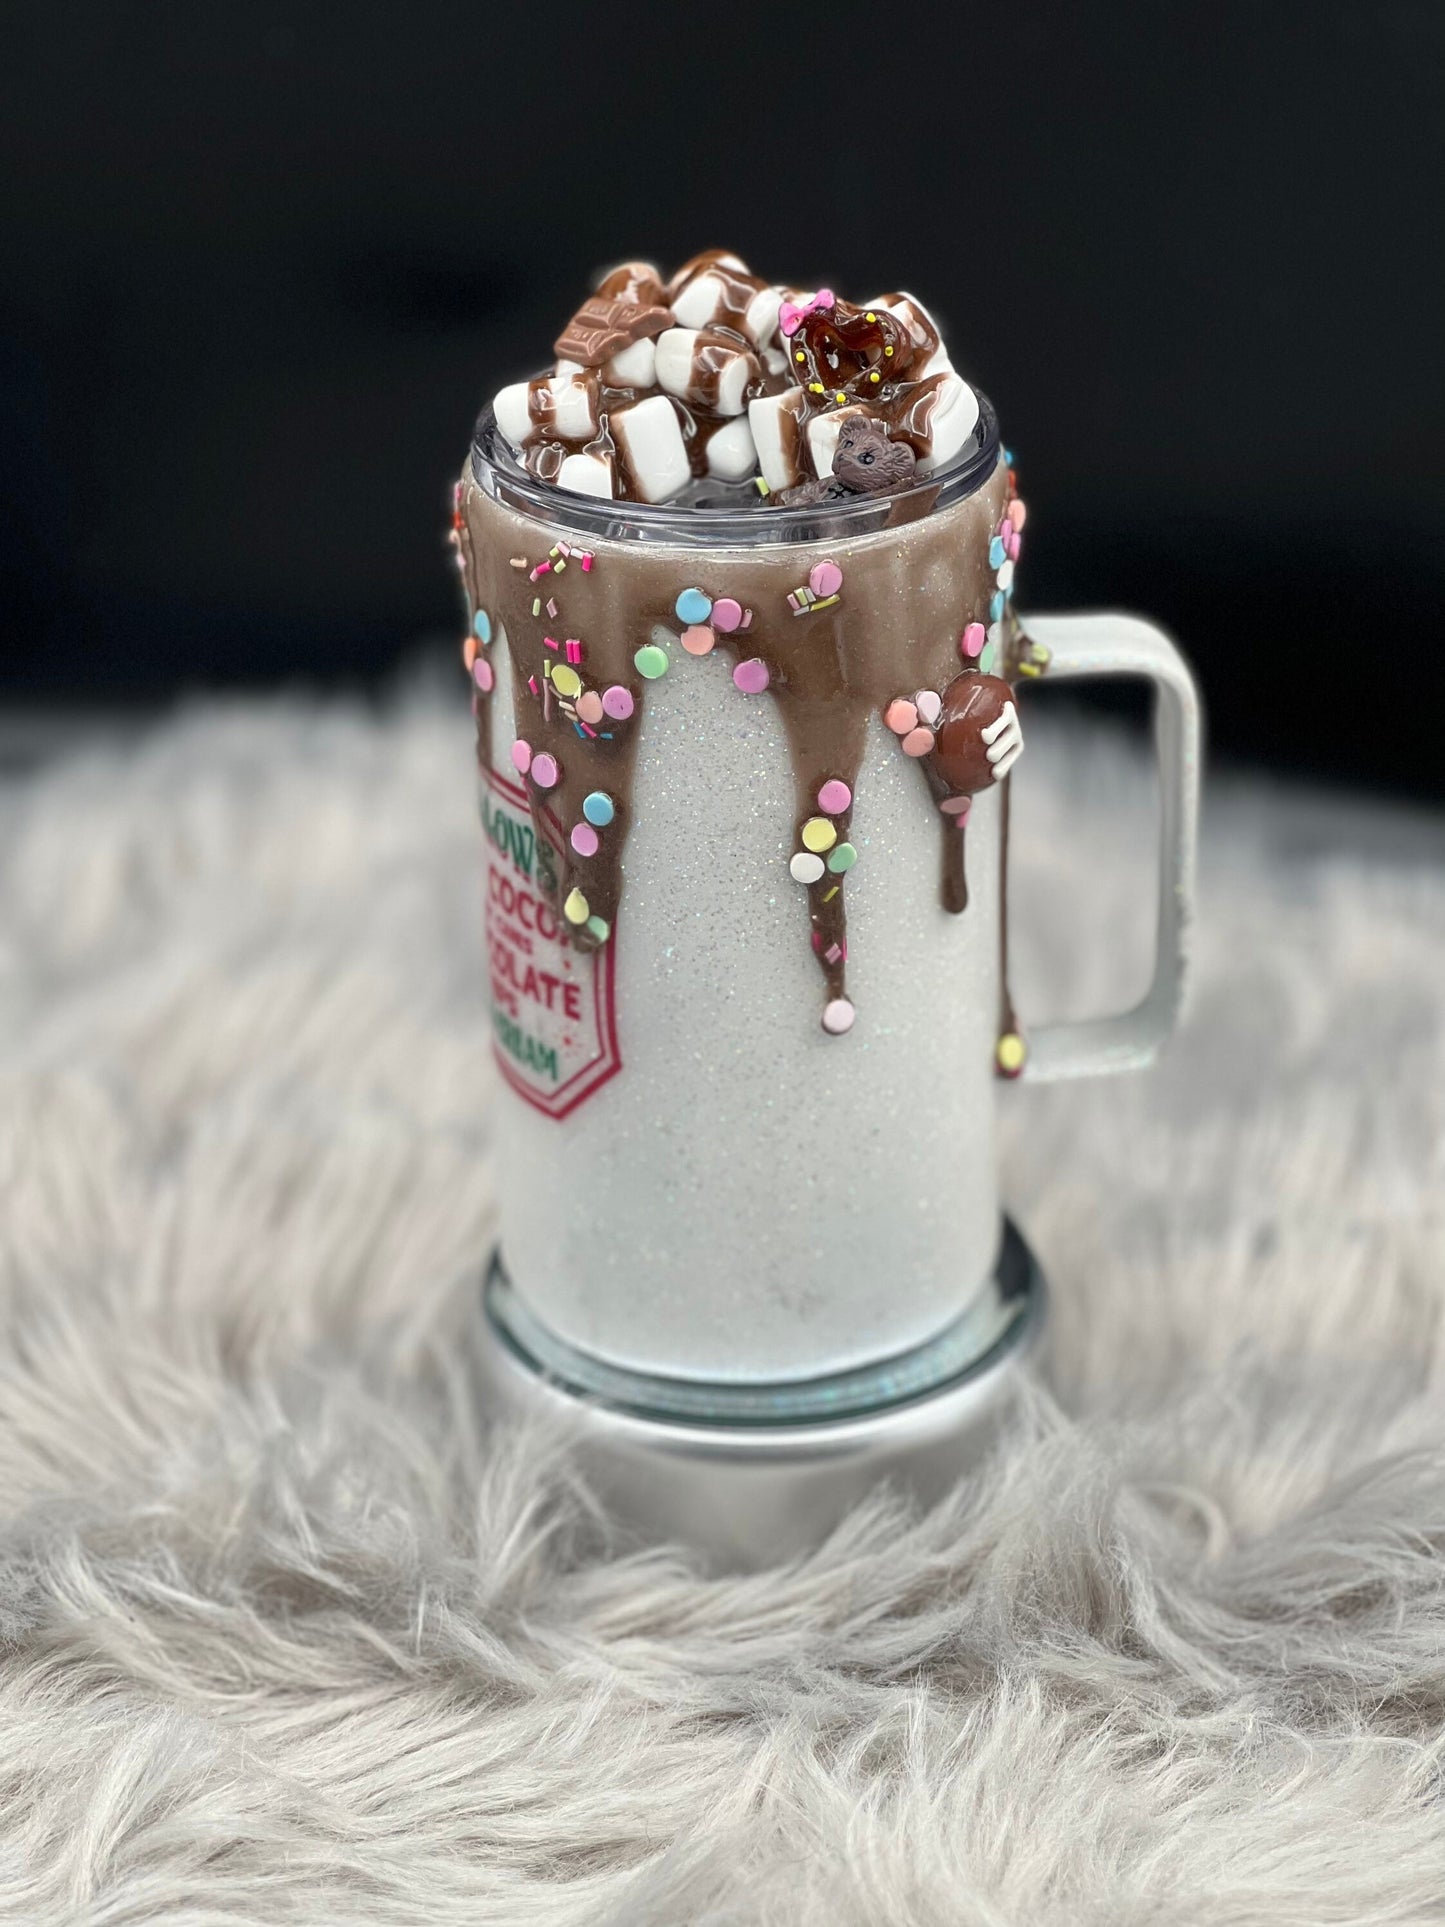 14oz Stainless Steel Coffee Mug: Hot Cocoa Delight with Faux Marshmallow Lid and Chocolate Drizzle